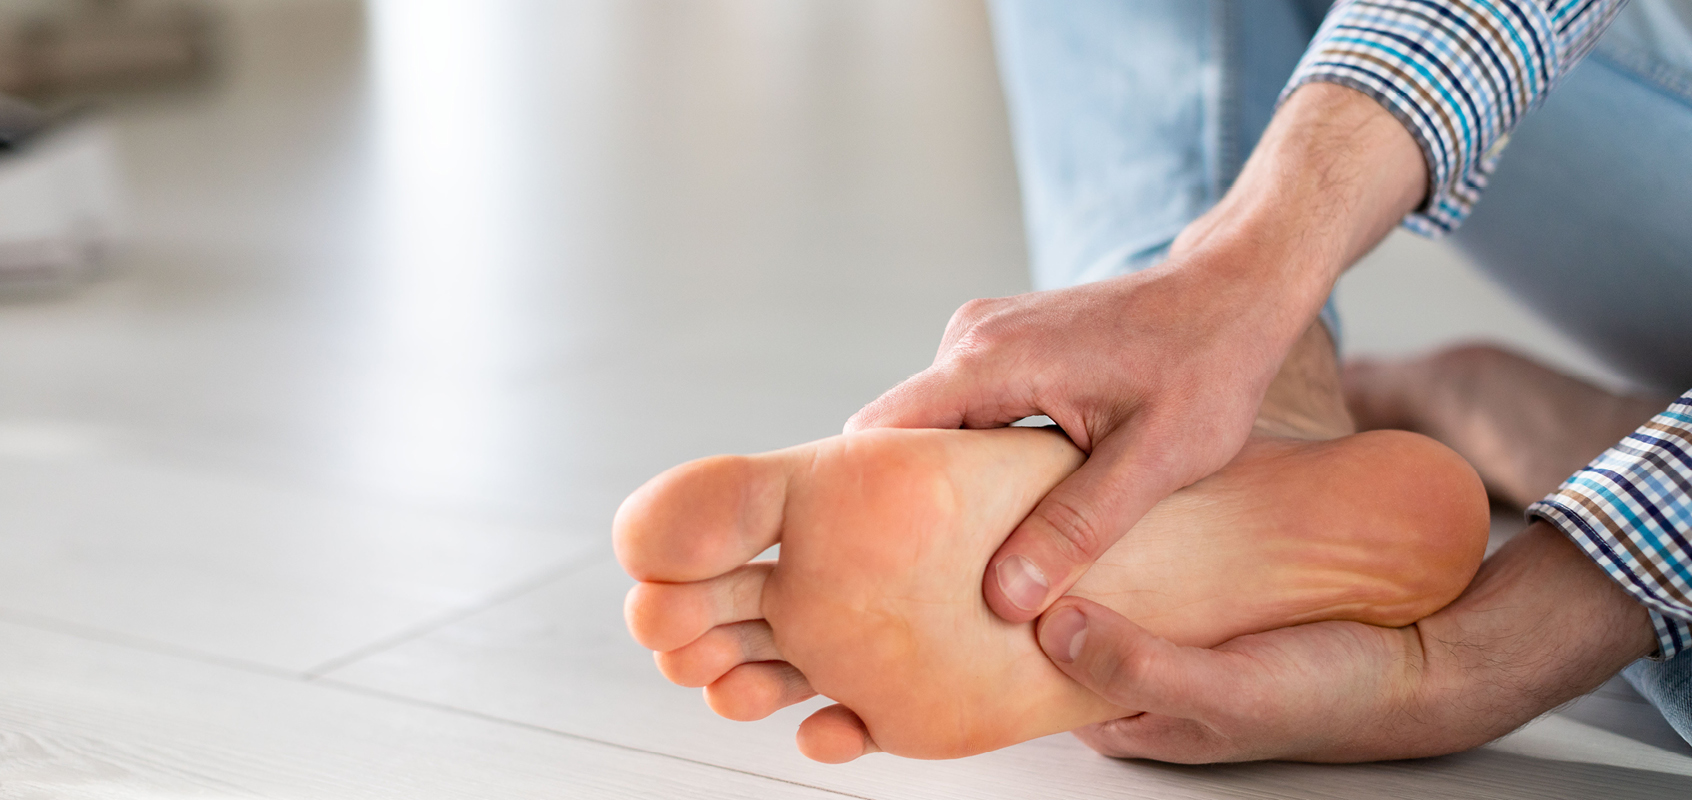 How To Manage Diabetic Foot Complications